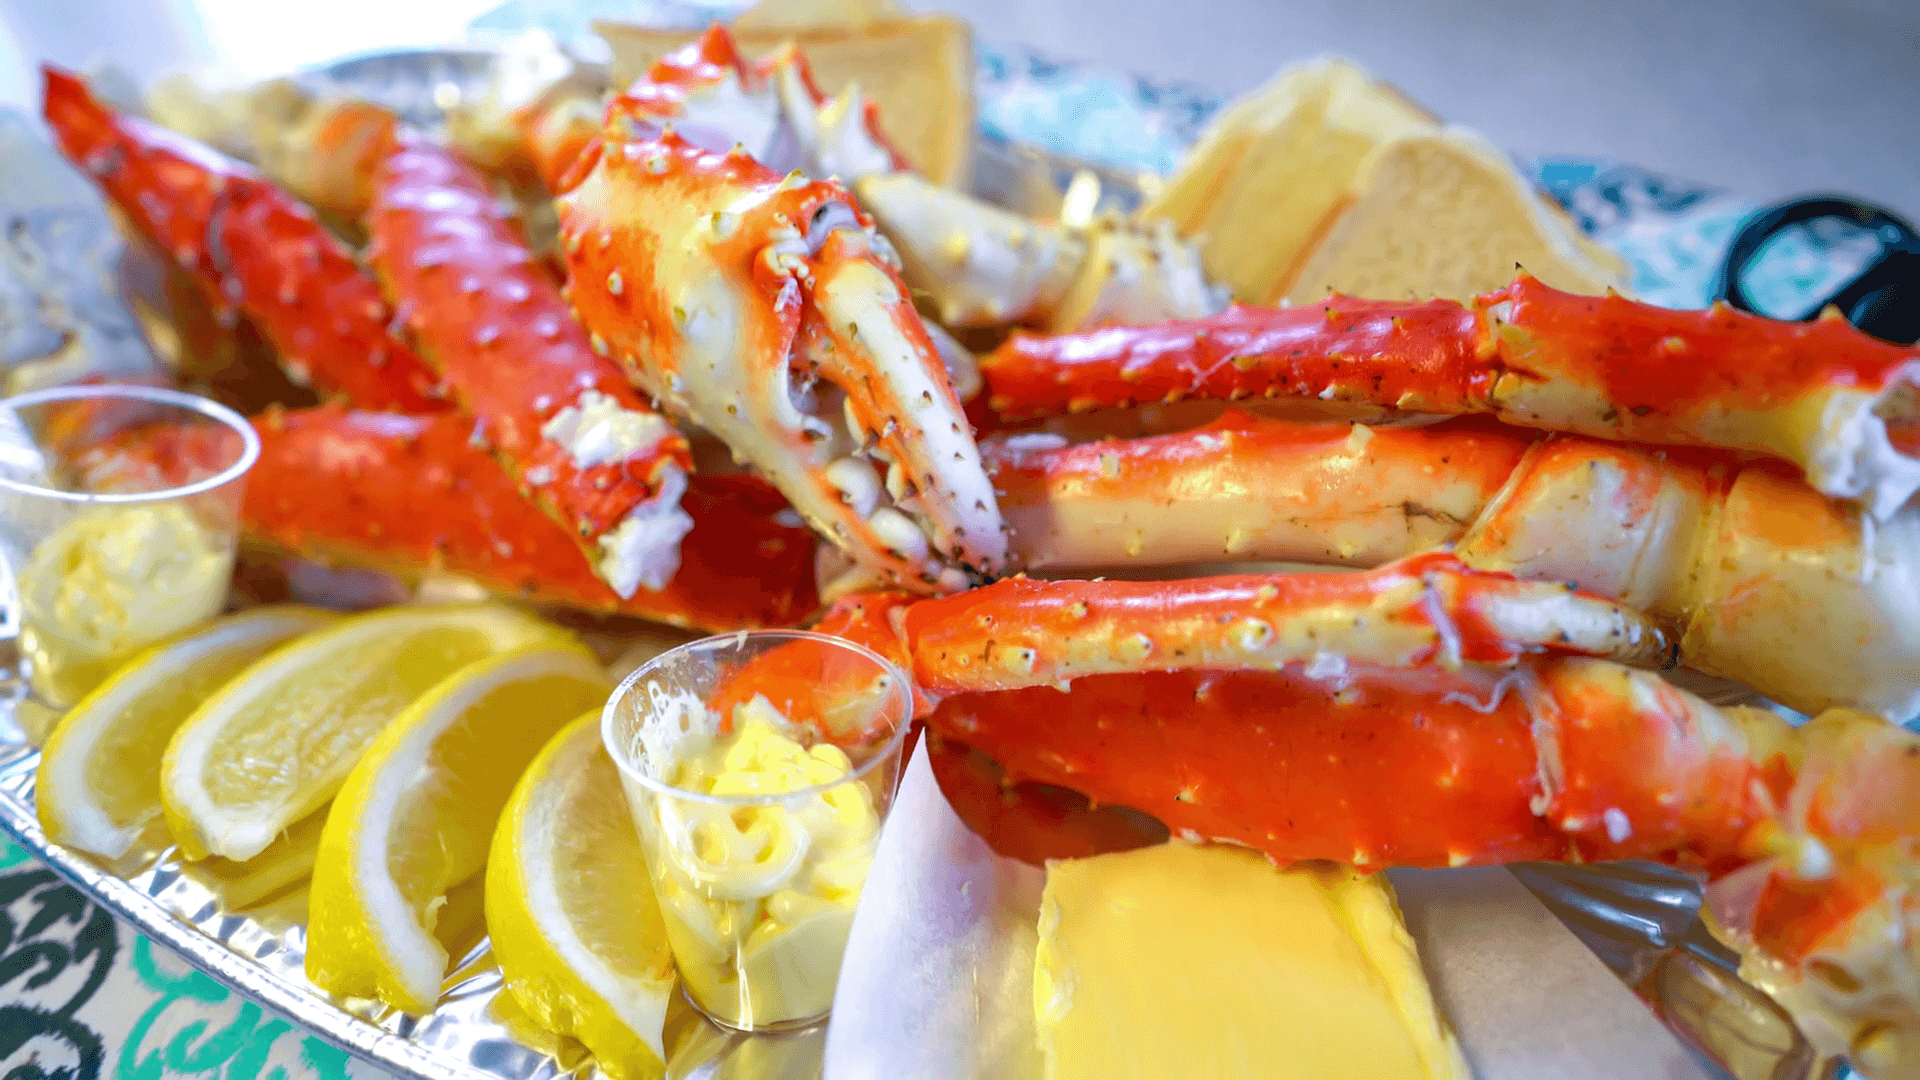 Red king crab legs with fresh lemon slices. Delicious seafood